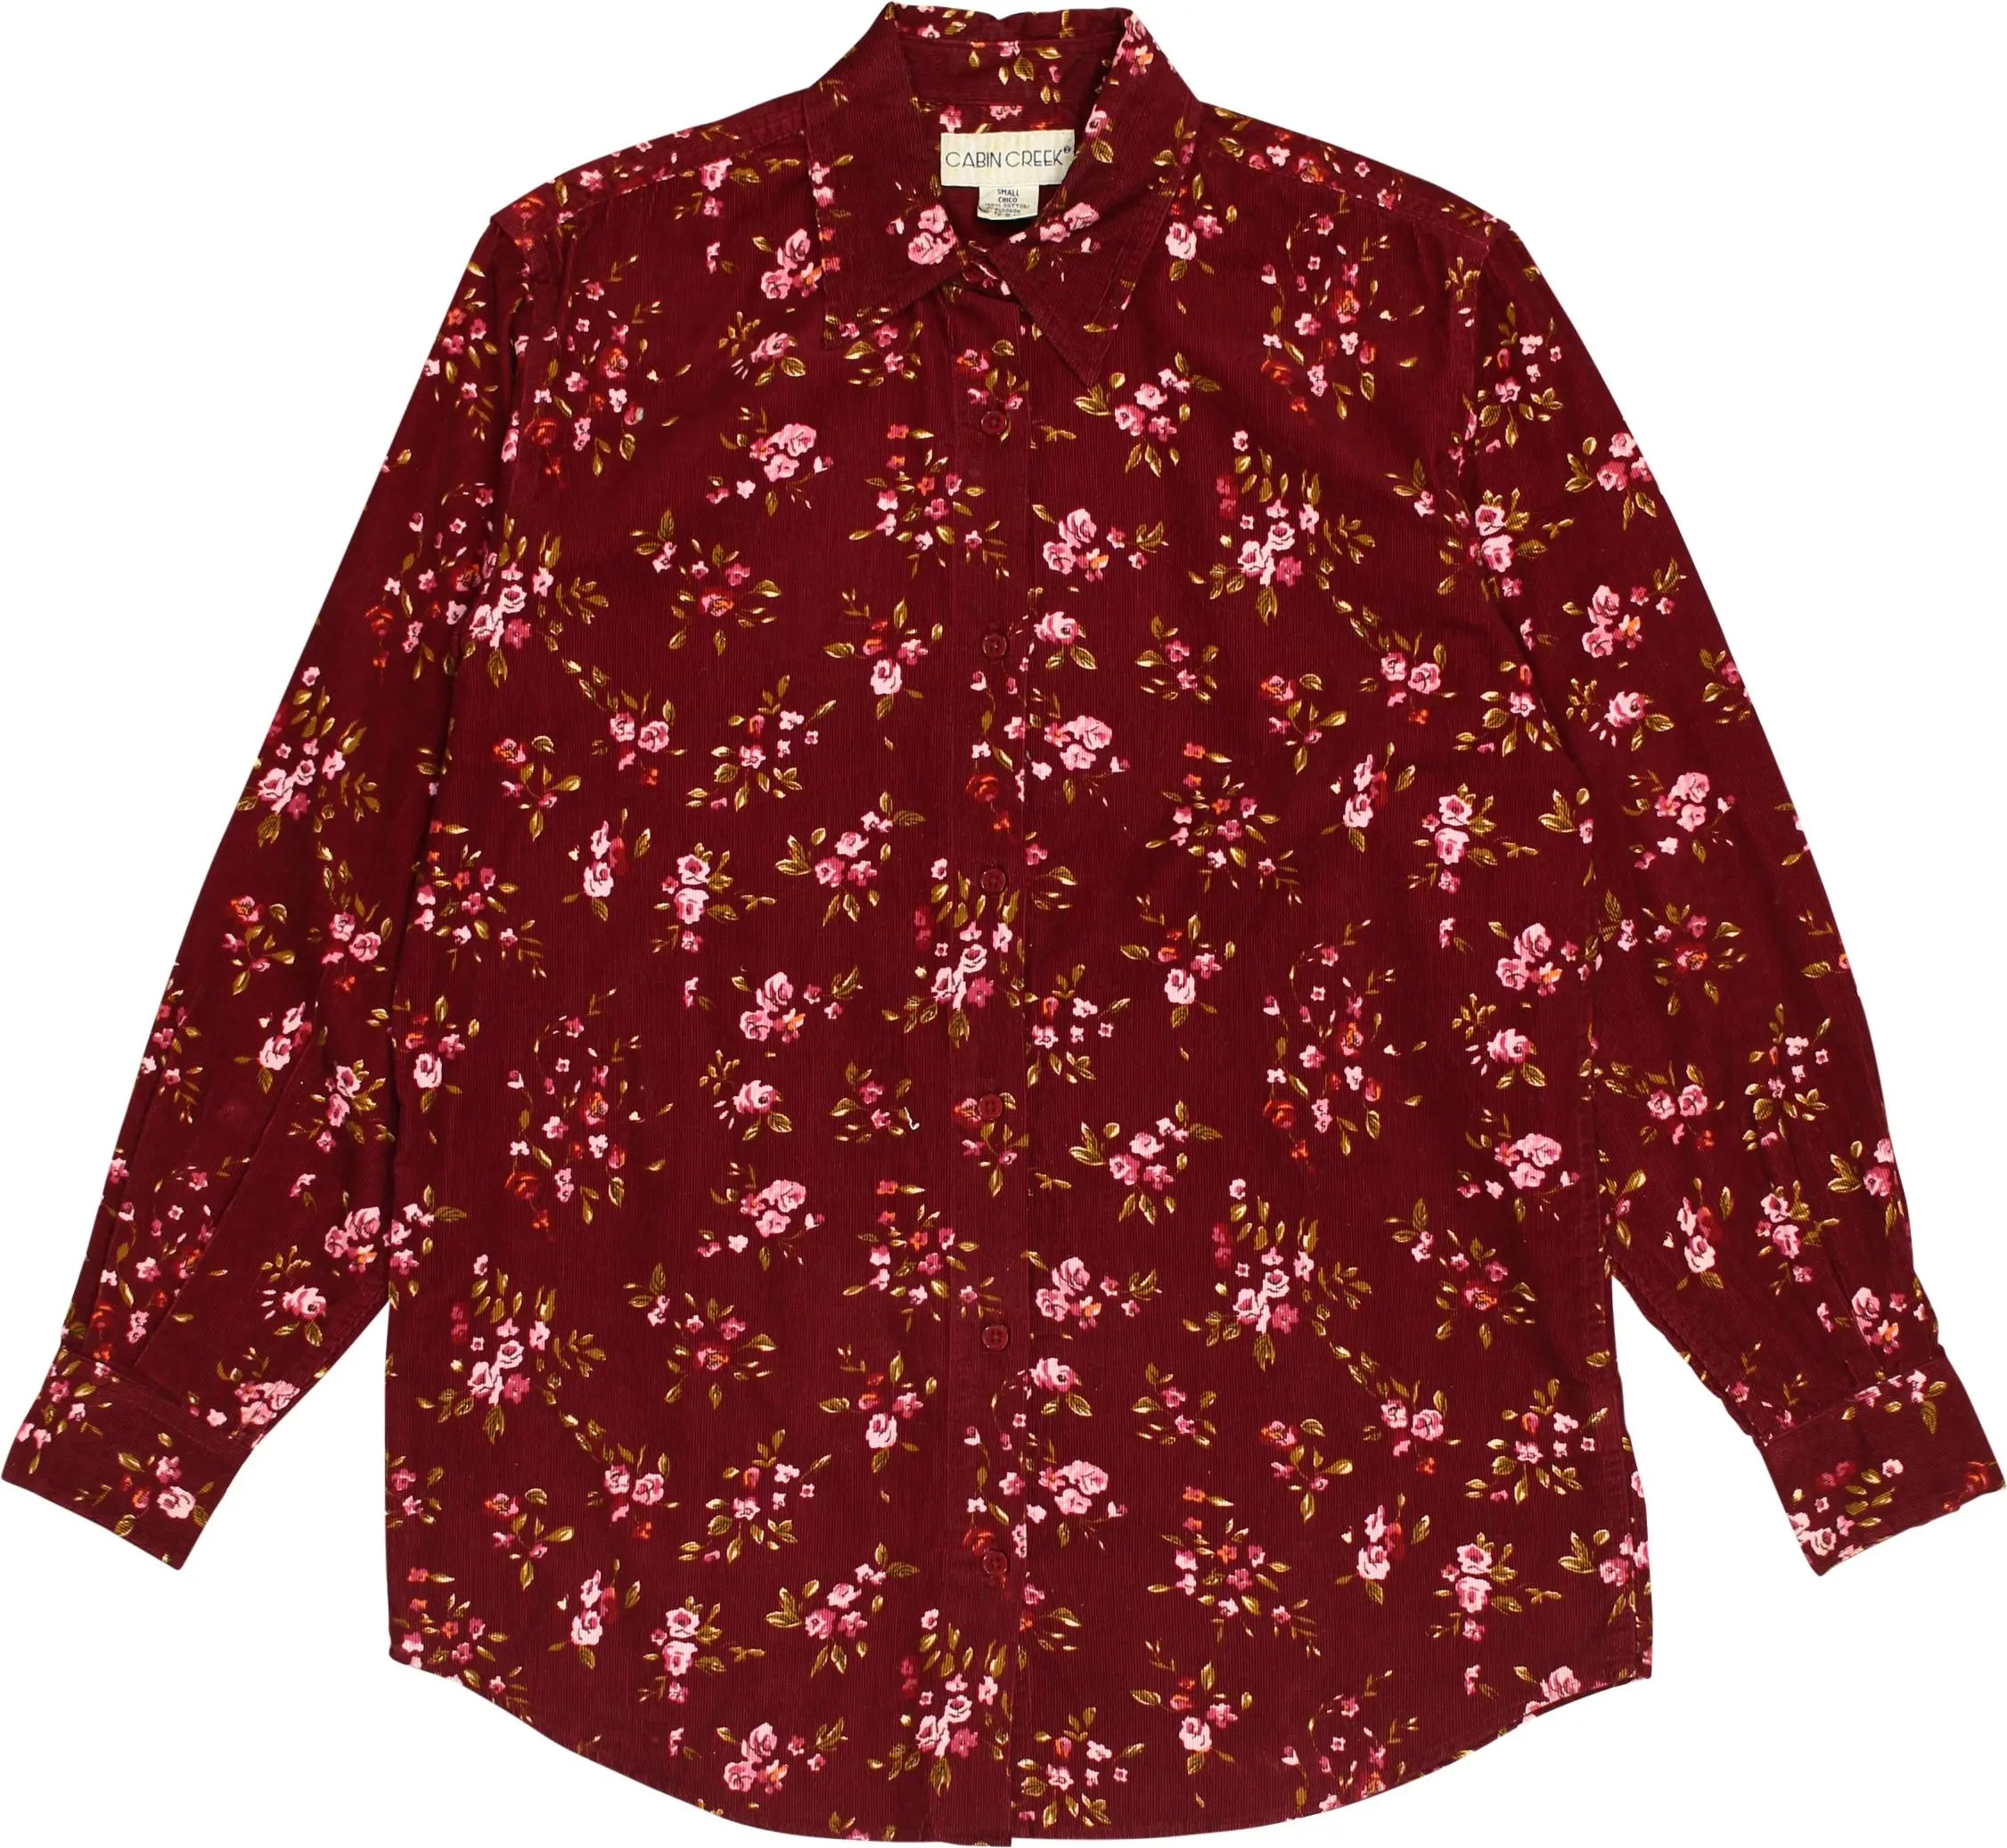 Cabin Creek - Floral Corduroy Shirt- ThriftTale.com - Vintage and second handclothing